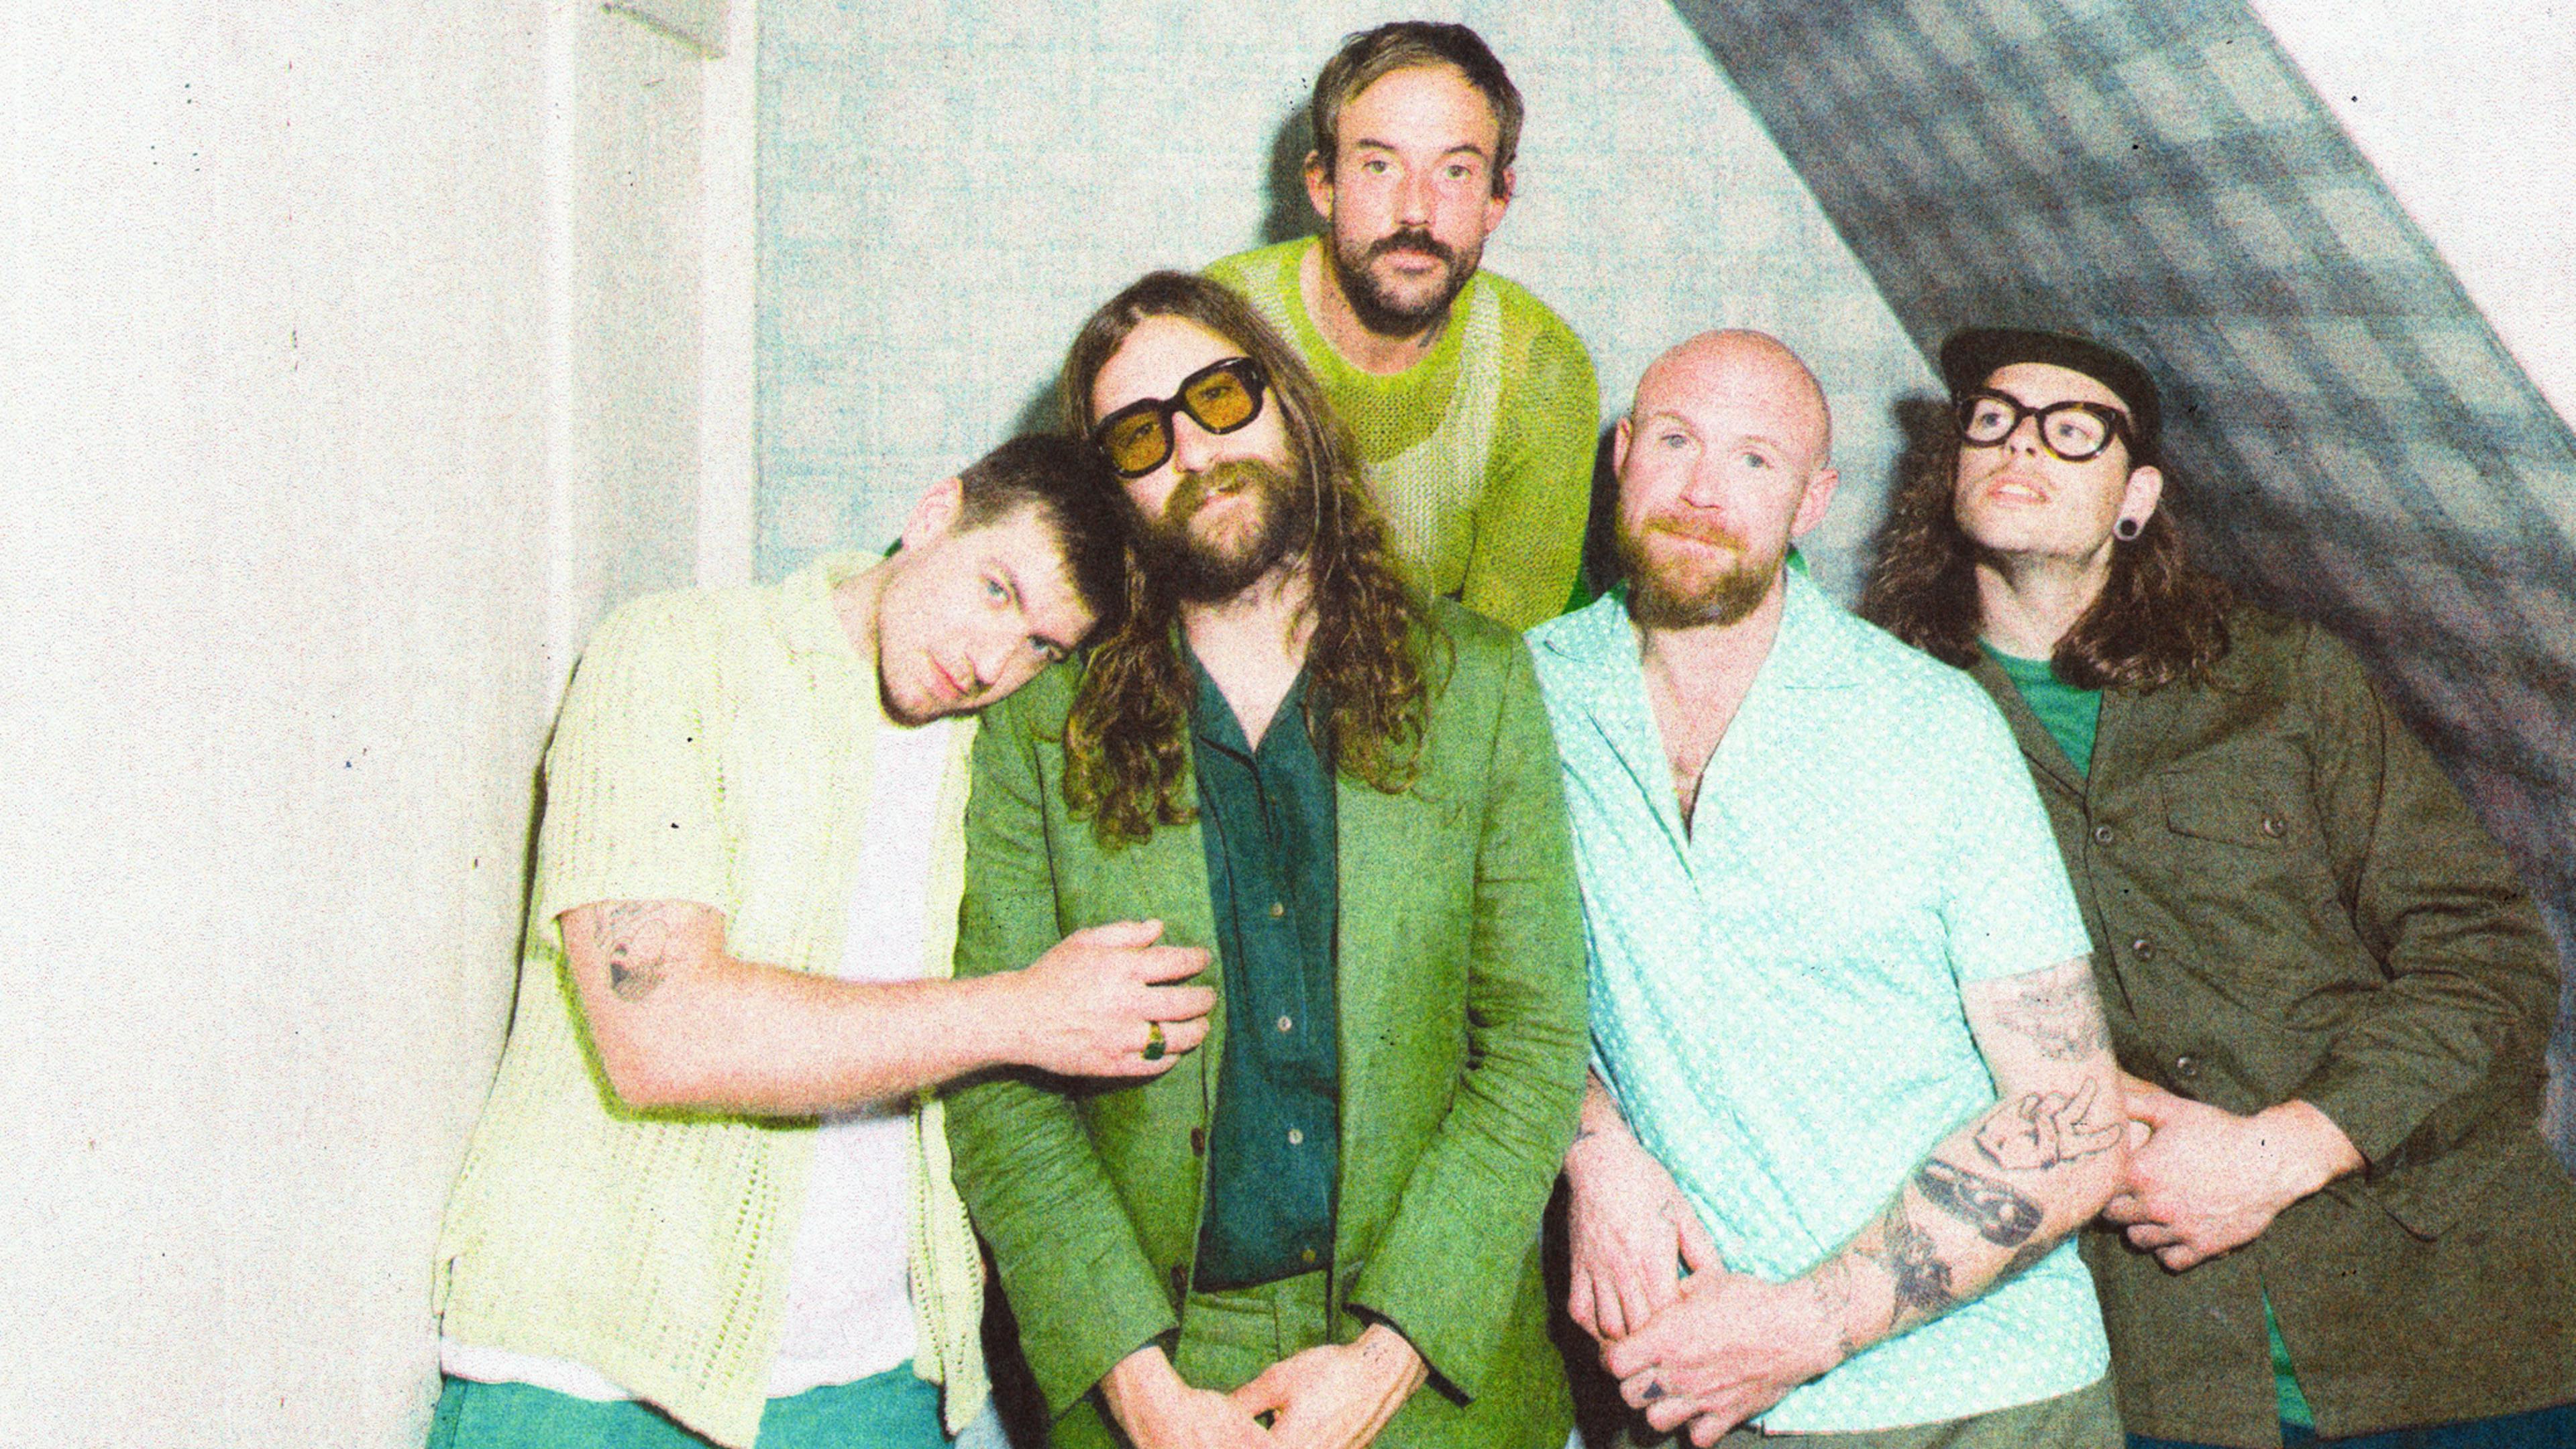 Hear IDLES cover Little Simz for the band’s first Spotify Singles release